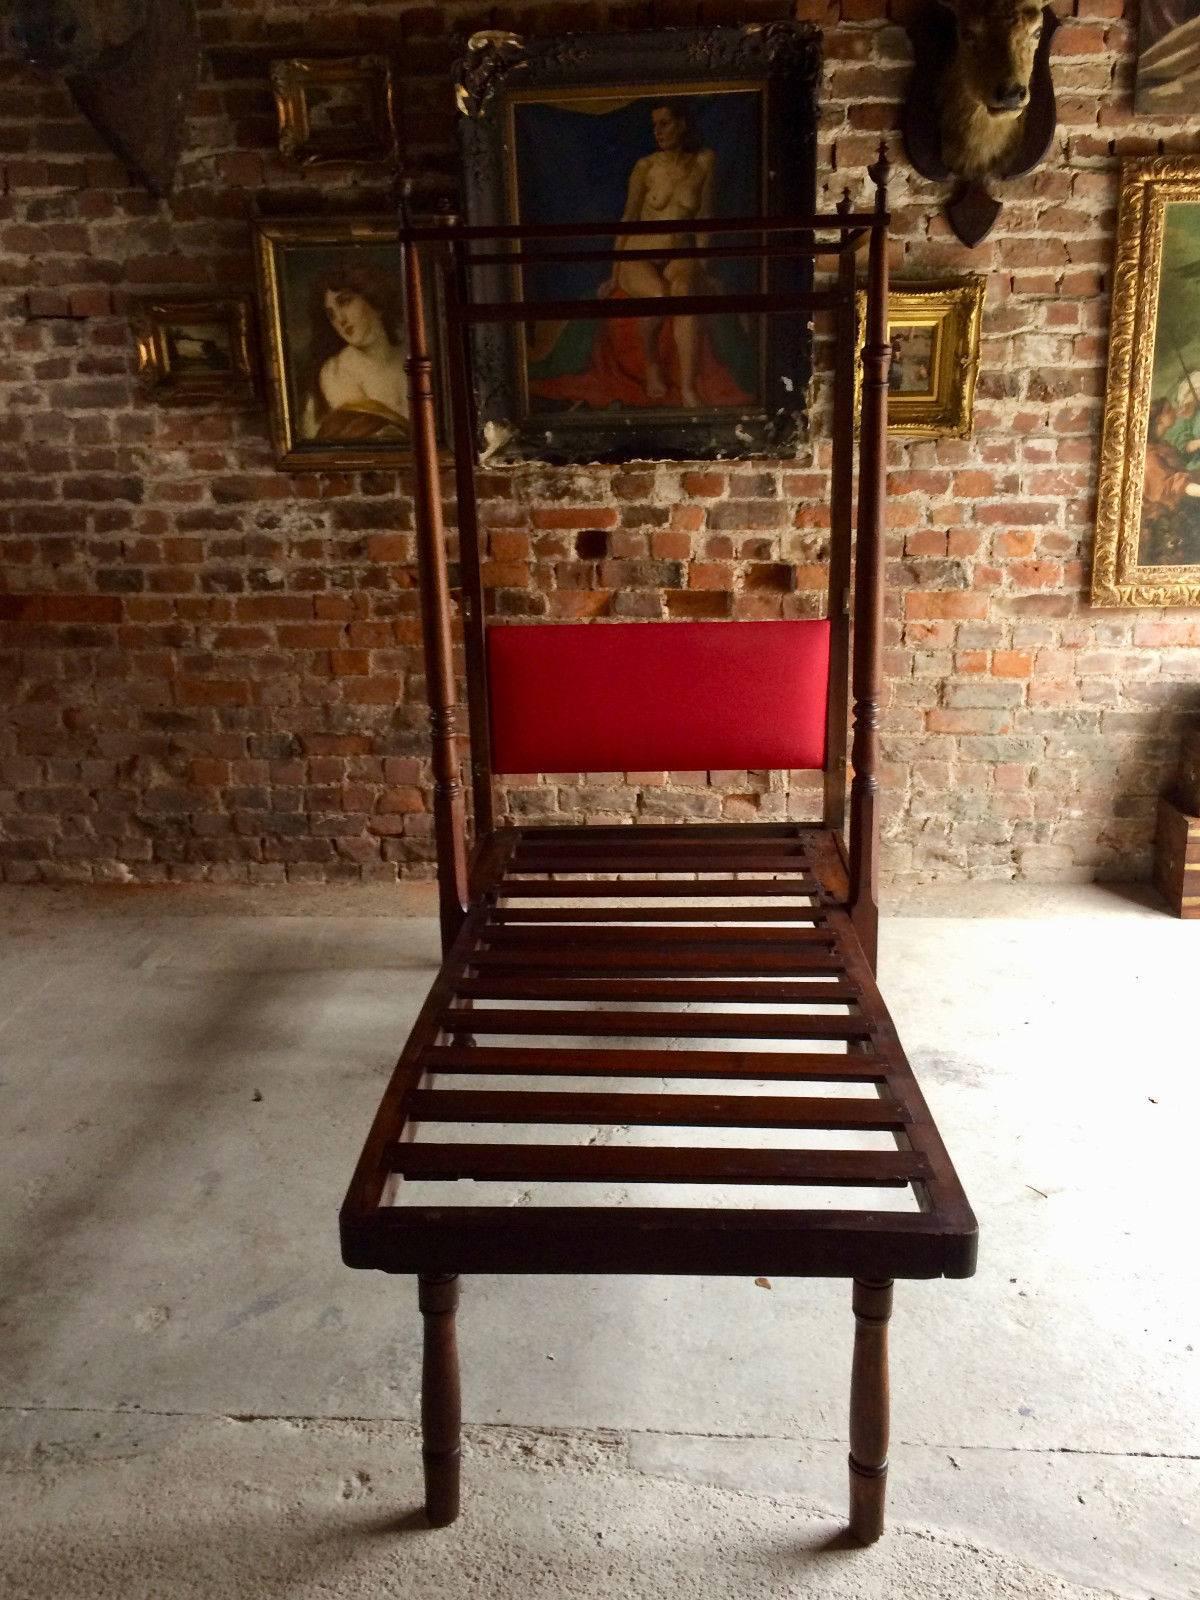 A beautiful antique early 19th century George III Campaign bed, circa 1820, the corner posts with large turned finials, the head board covered in a deep red fabric, typical four post canopy for mosquito netting above, the bed folds up to increase